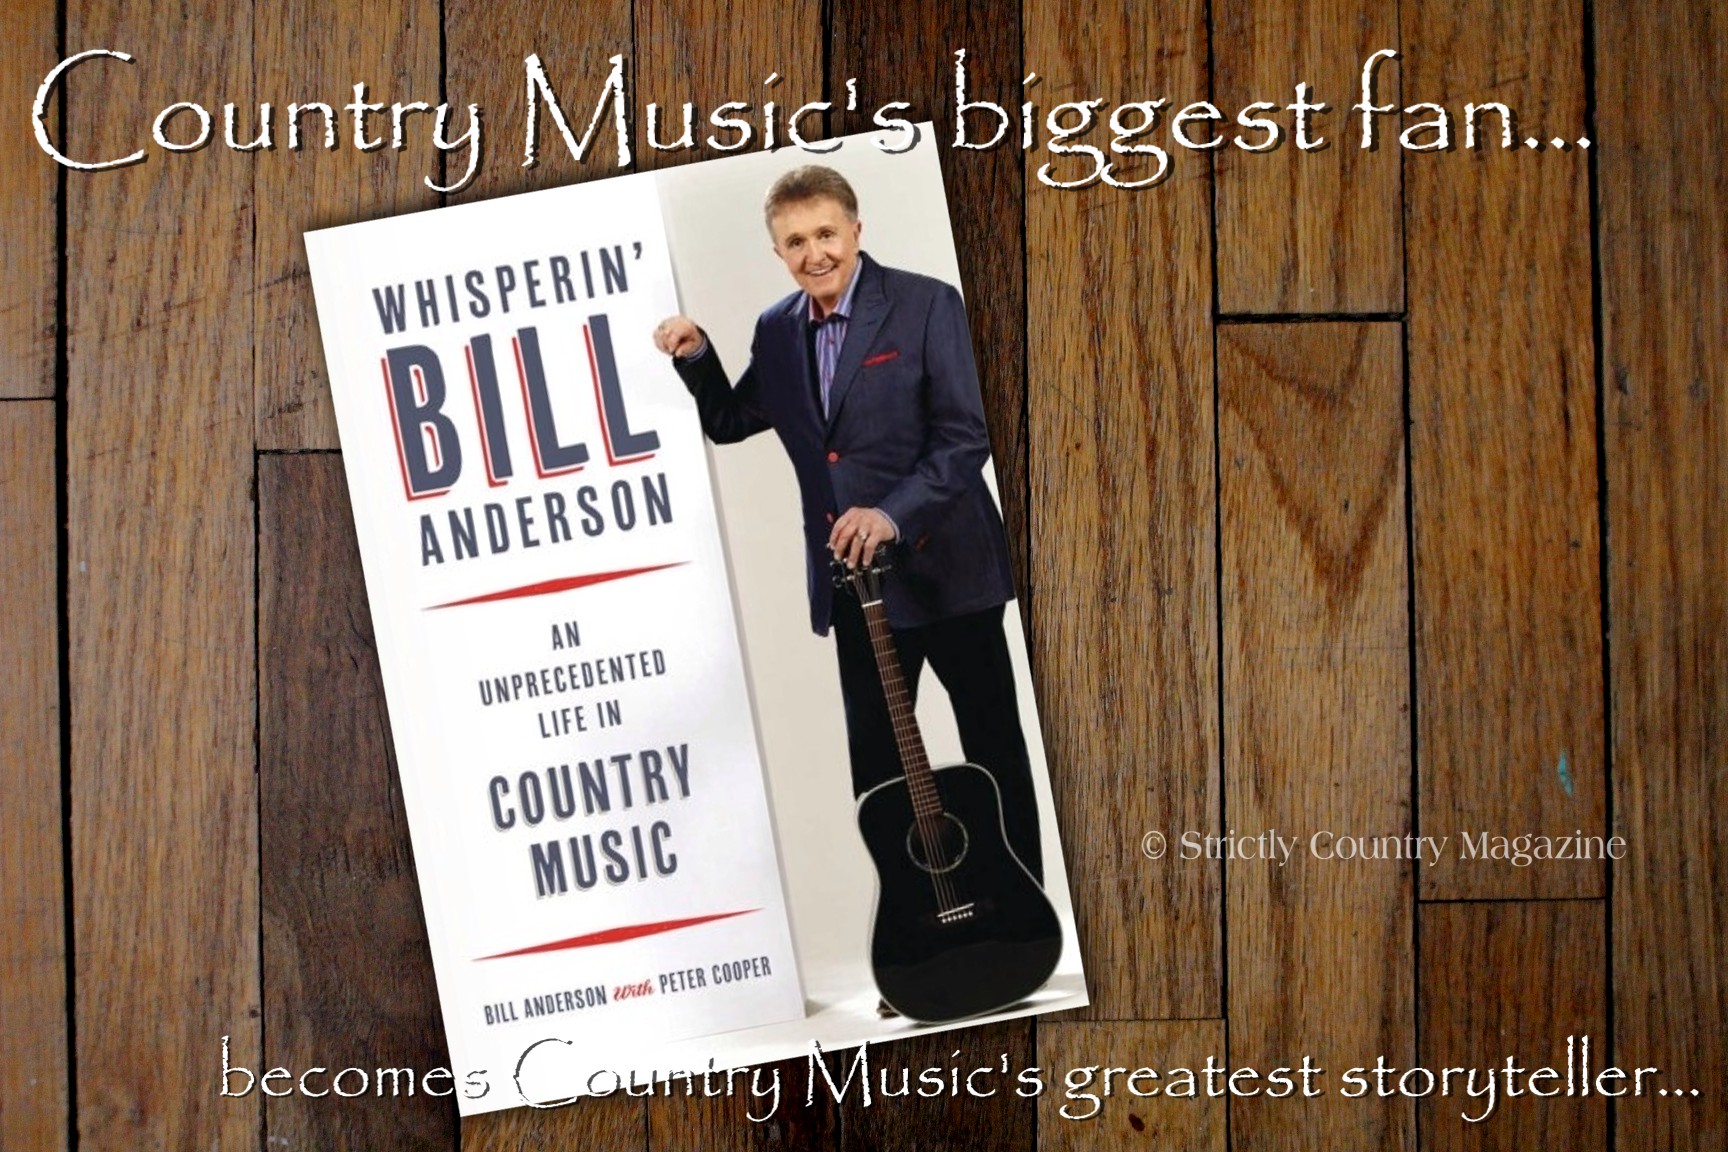 Strictly Country Magazine copyright Bill Anderson